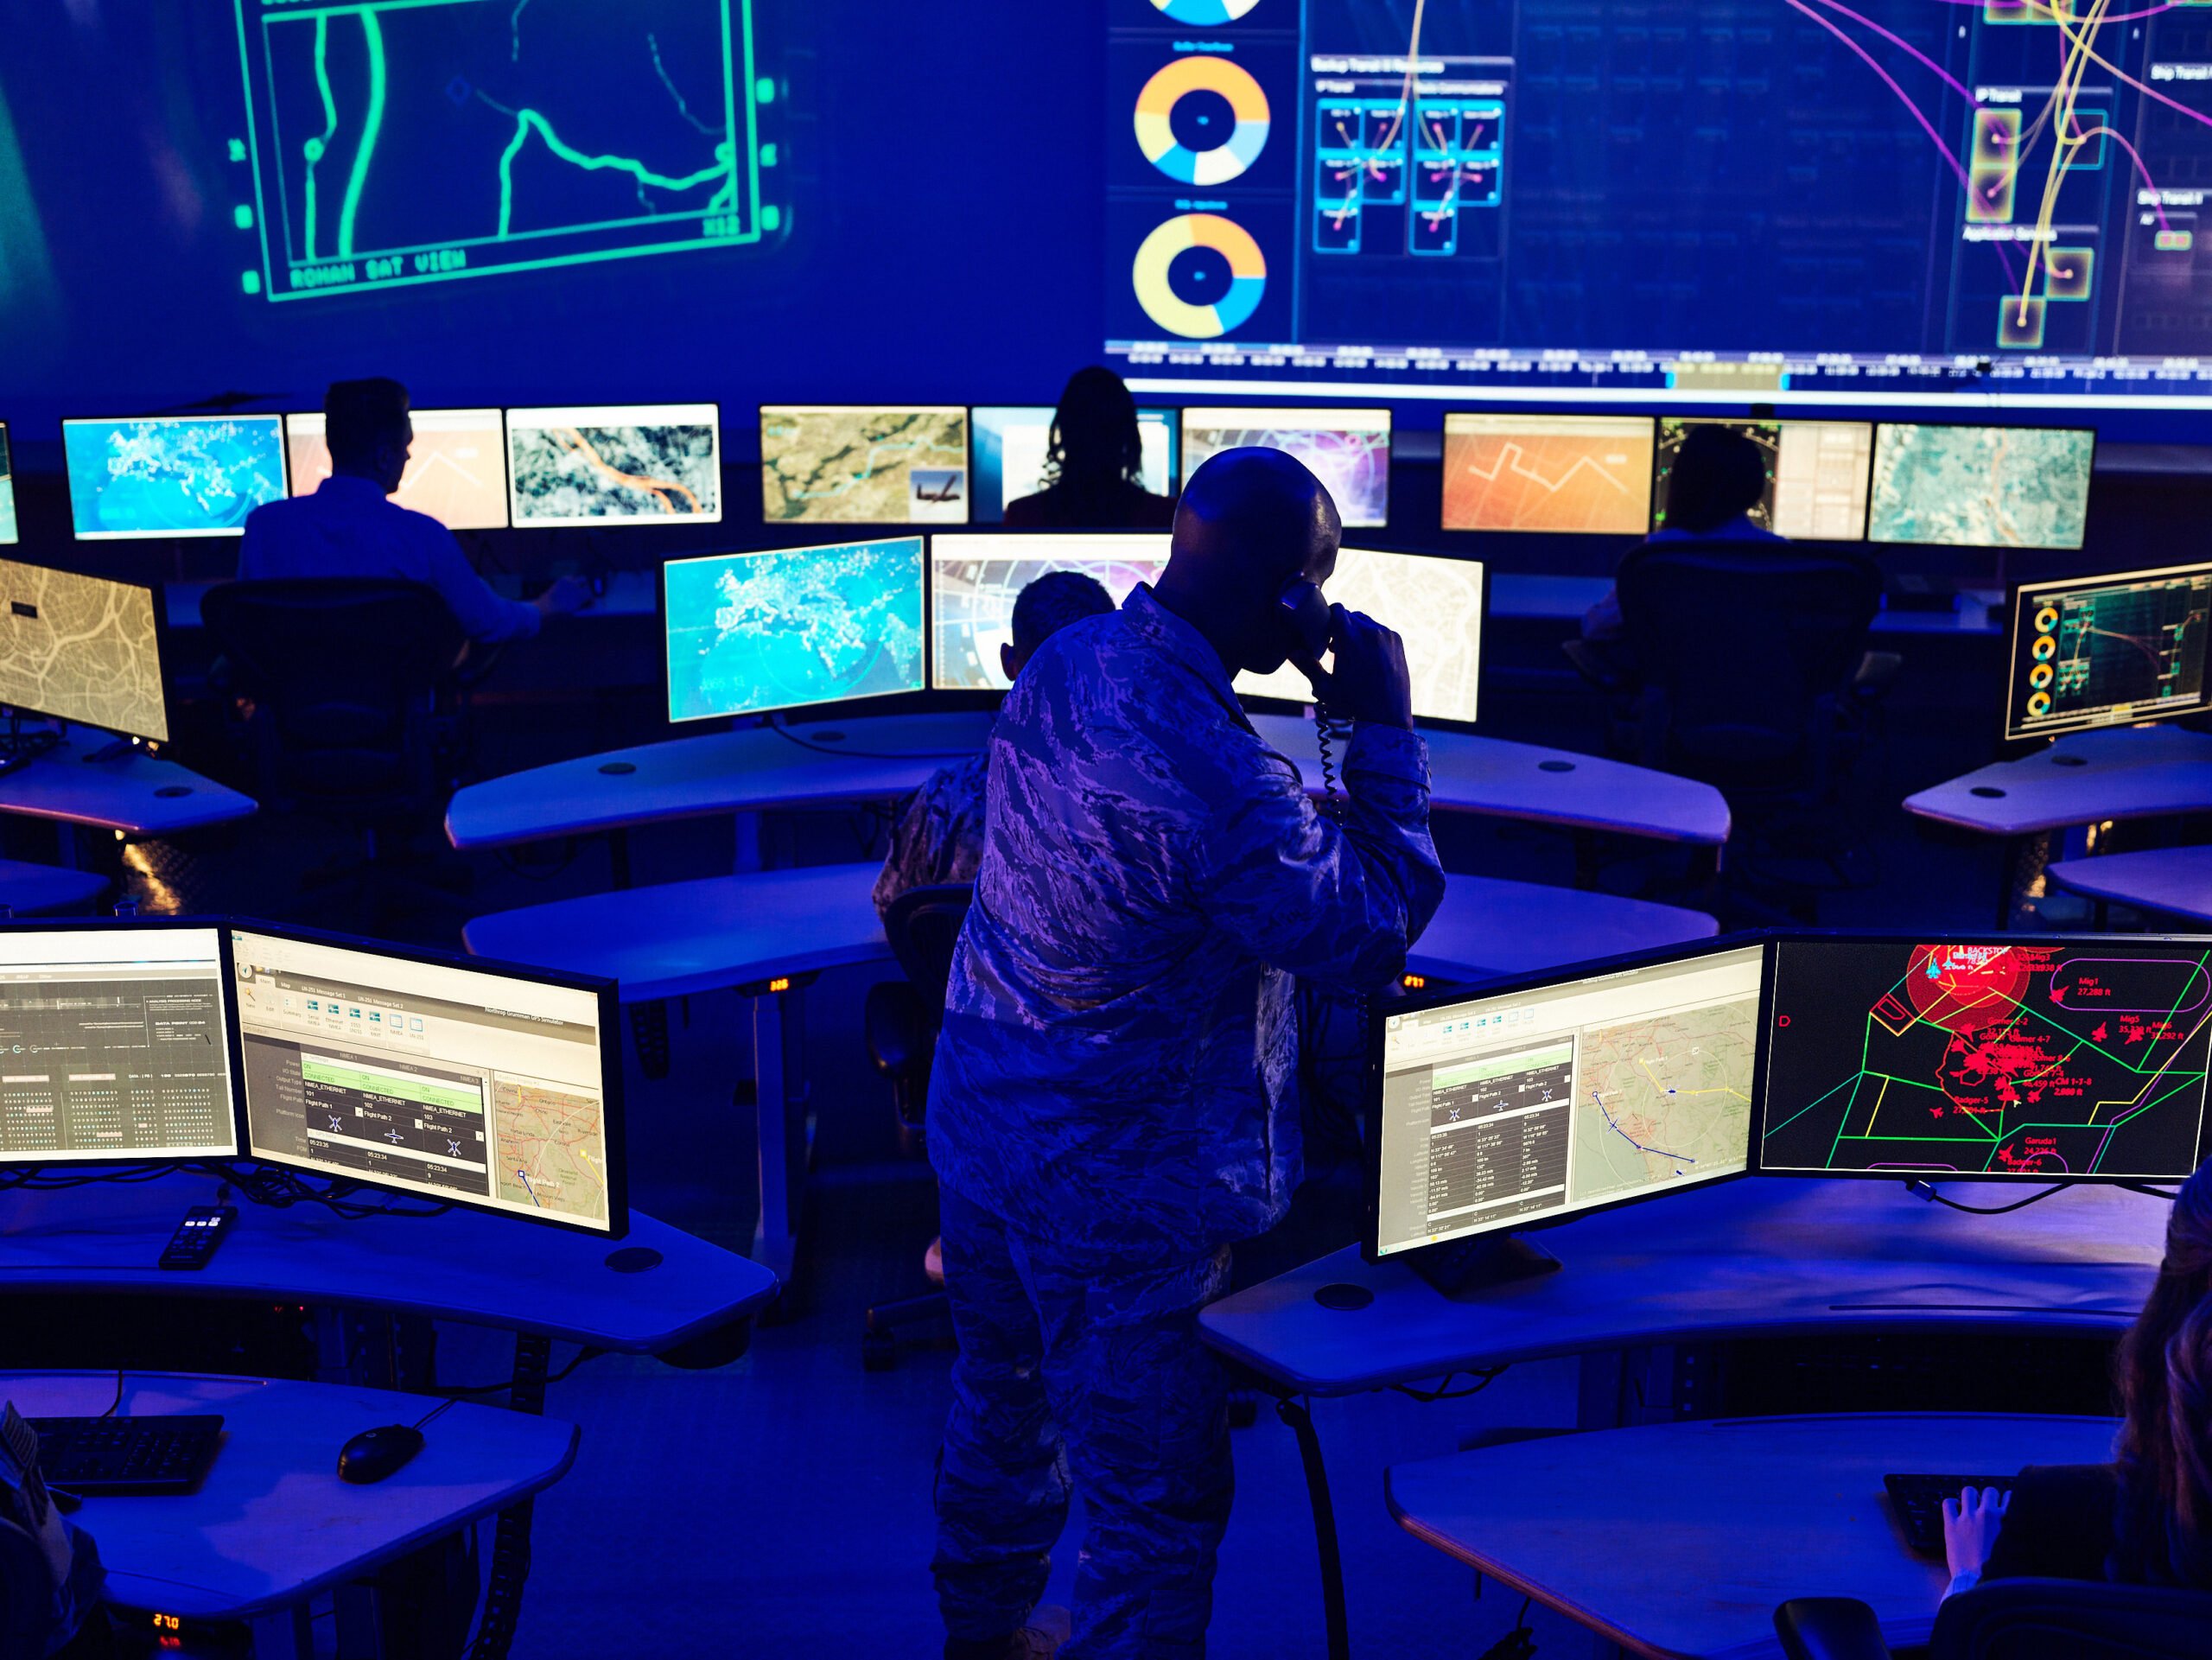 COMMAND CENTER_Control Room CYBER_CLISH_10_13_19_0513 Source